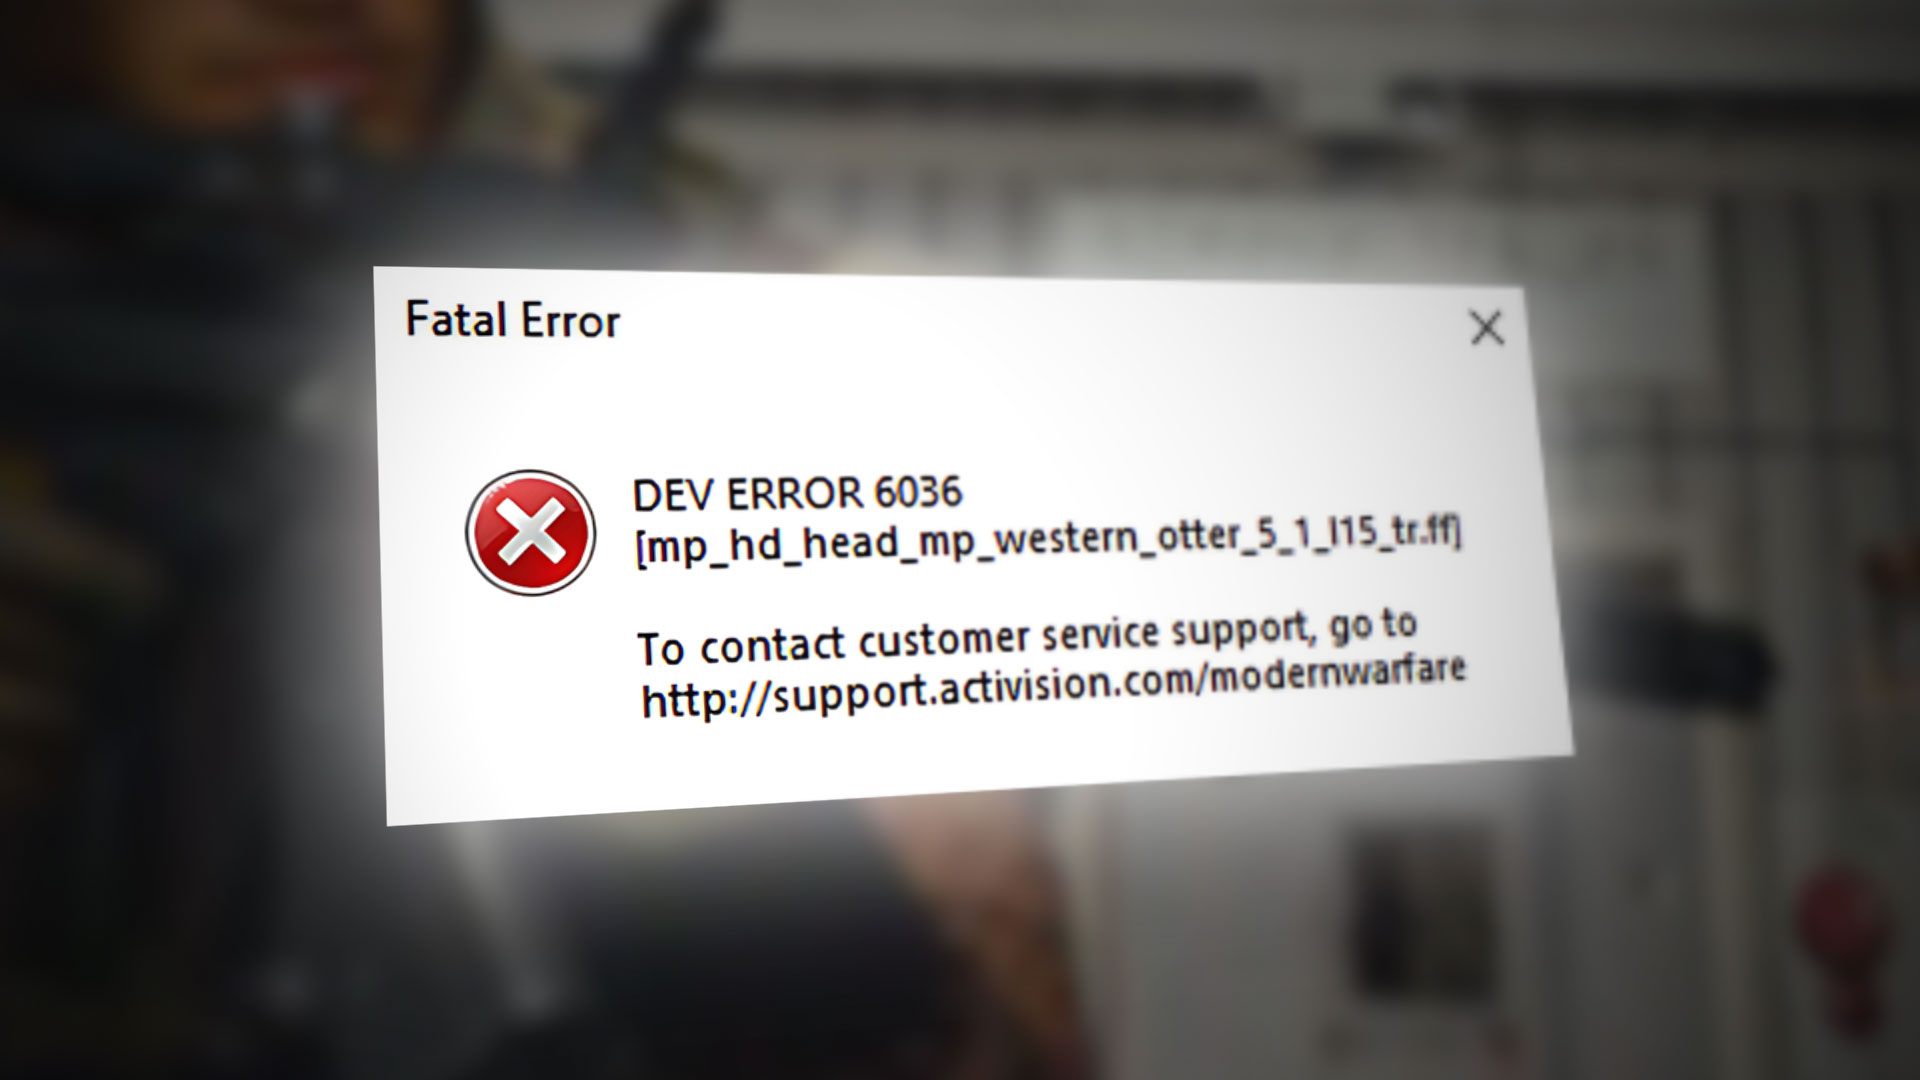 Launcher error fatal error failed to connect with local steam client process please make sure фото 41